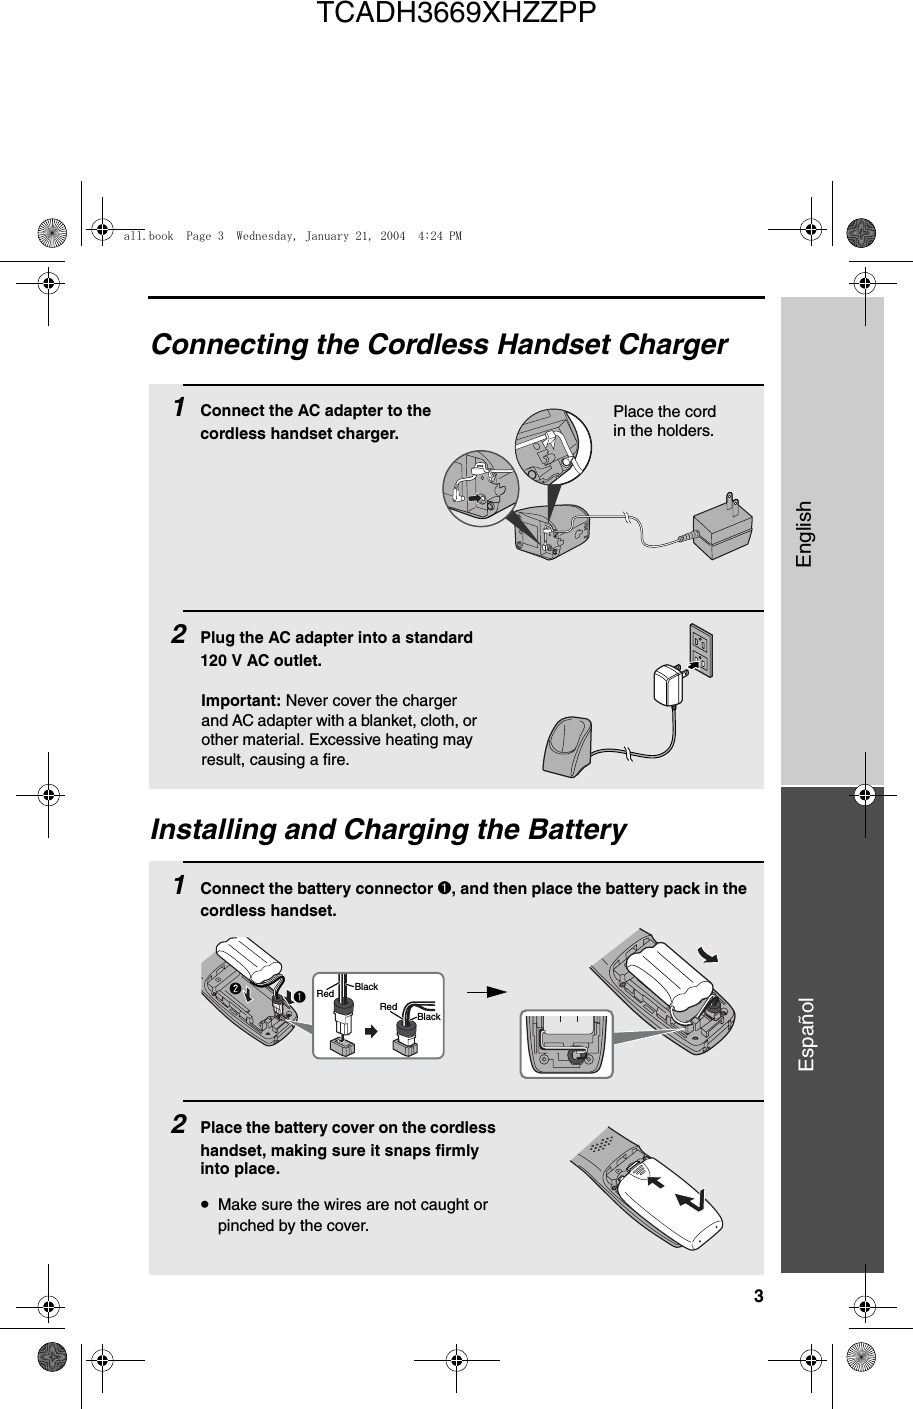 3EnglishEspañolConnecting the Cordless Handset Charger1Connect the AC adapter to the cordless handset charger.2Plug the AC adapter into a standard 120 V AC outlet.Place the cord in the holders.Installing and Charging the Battery1Connect the battery connector ➊, and then place the battery pack in the cordless handset.2Place the battery cover on the cordless handset, making sure it snaps firmly into place.•Make sure the wires are not caught or pinched by the cover.BlackRedBlackRedImportant: Never cover the charger and AC adapter with a blanket, cloth, or other material. Excessive heating may result, causing a fire.all.book  Page 3  Wednesday, January 21, 2004  4:24 PMTCADH3669XHZZPP